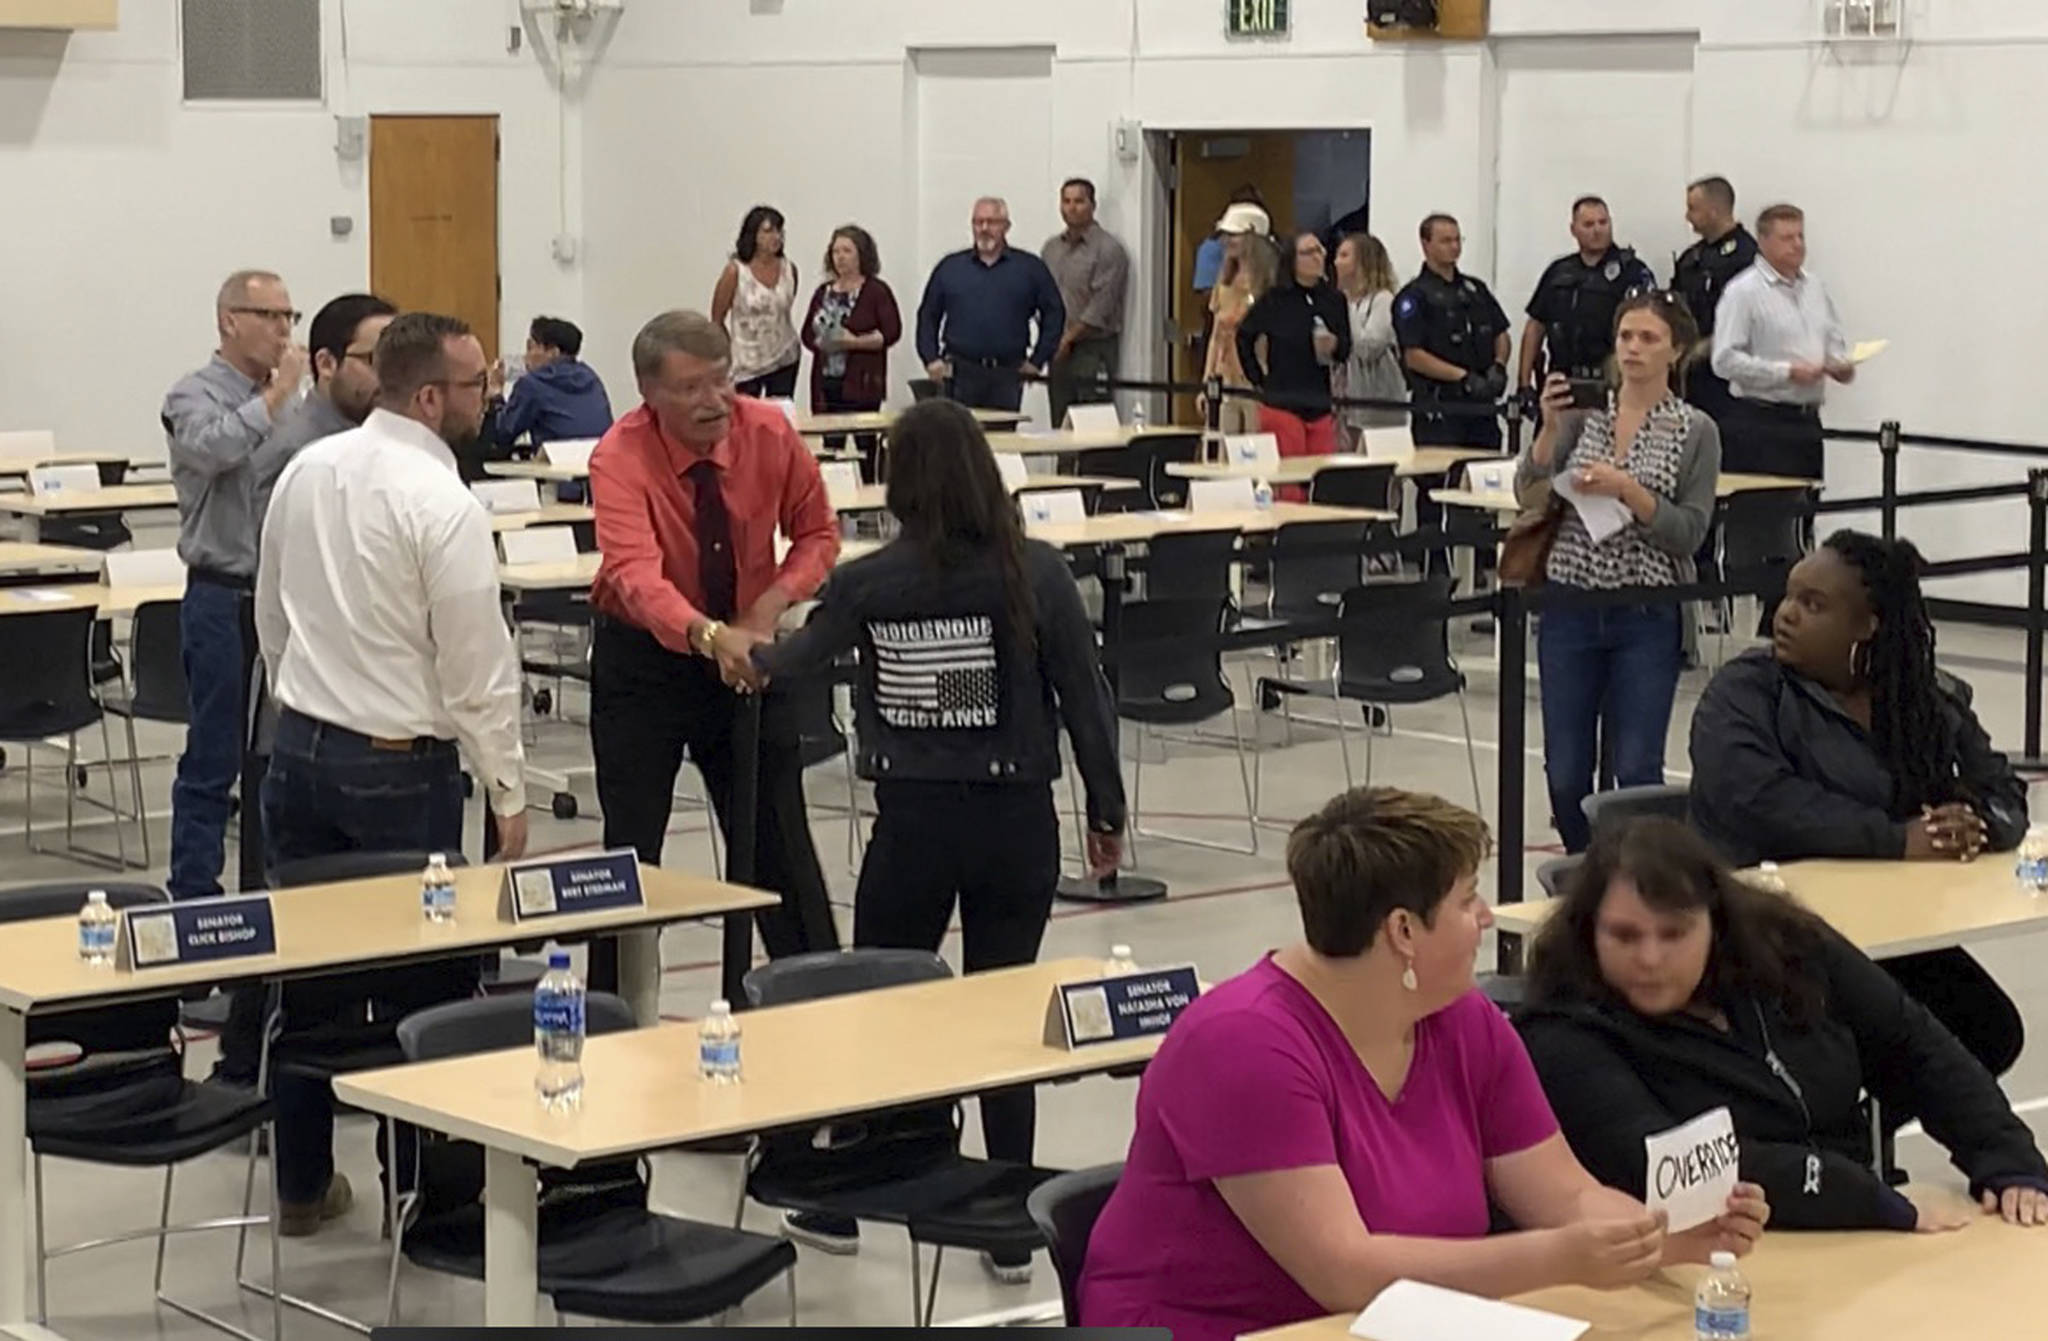 In this July 10, 2019, photo provided by Rochelle Adams, the mayor of Wasilla, Alaska, Bert Cottle, center left in the orange shirt, is seen grabbing the arm of Alaska Native activist Haliehana Stepetin, who was trying to take part in a sit-in of legislators meeting in Wasilla. Stepetin filed an assault complaint with the Wasilla Police Department on Thursday, naming Cottle and Zachary Freeman, the spokesman for the Republican House Minority, seen next to Cottle in the white dress shirt. (Rochelle Adams via AP)